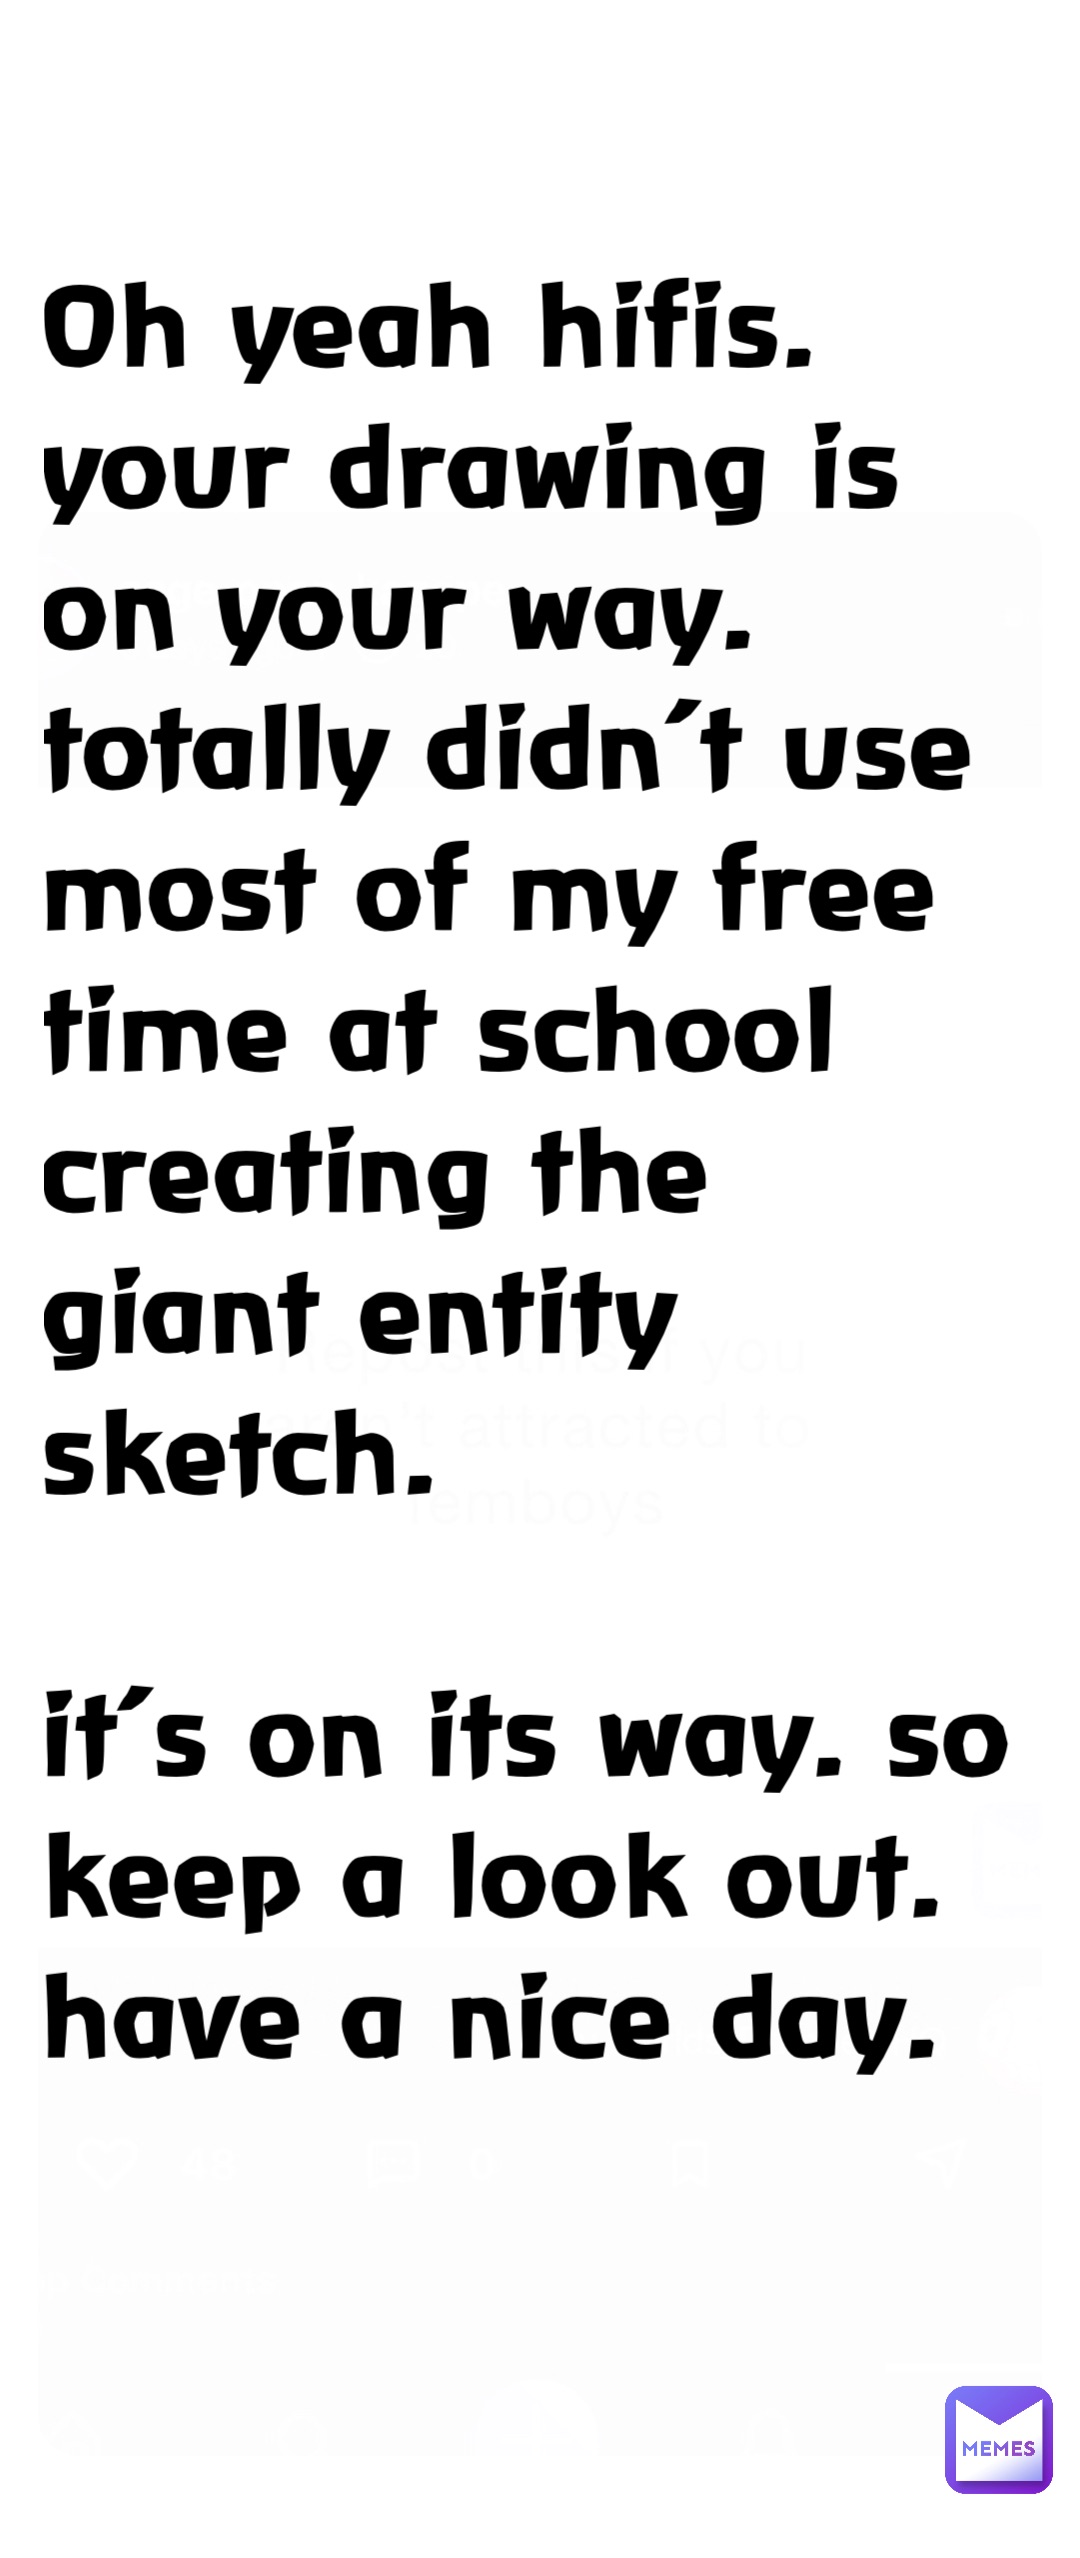 Oh yeah hifis. Your drawing is on your way. Totally didn’t use most of my free time at school creating the giant entity sketch. 

It’s on its way. So keep a look out. Have a nice day.